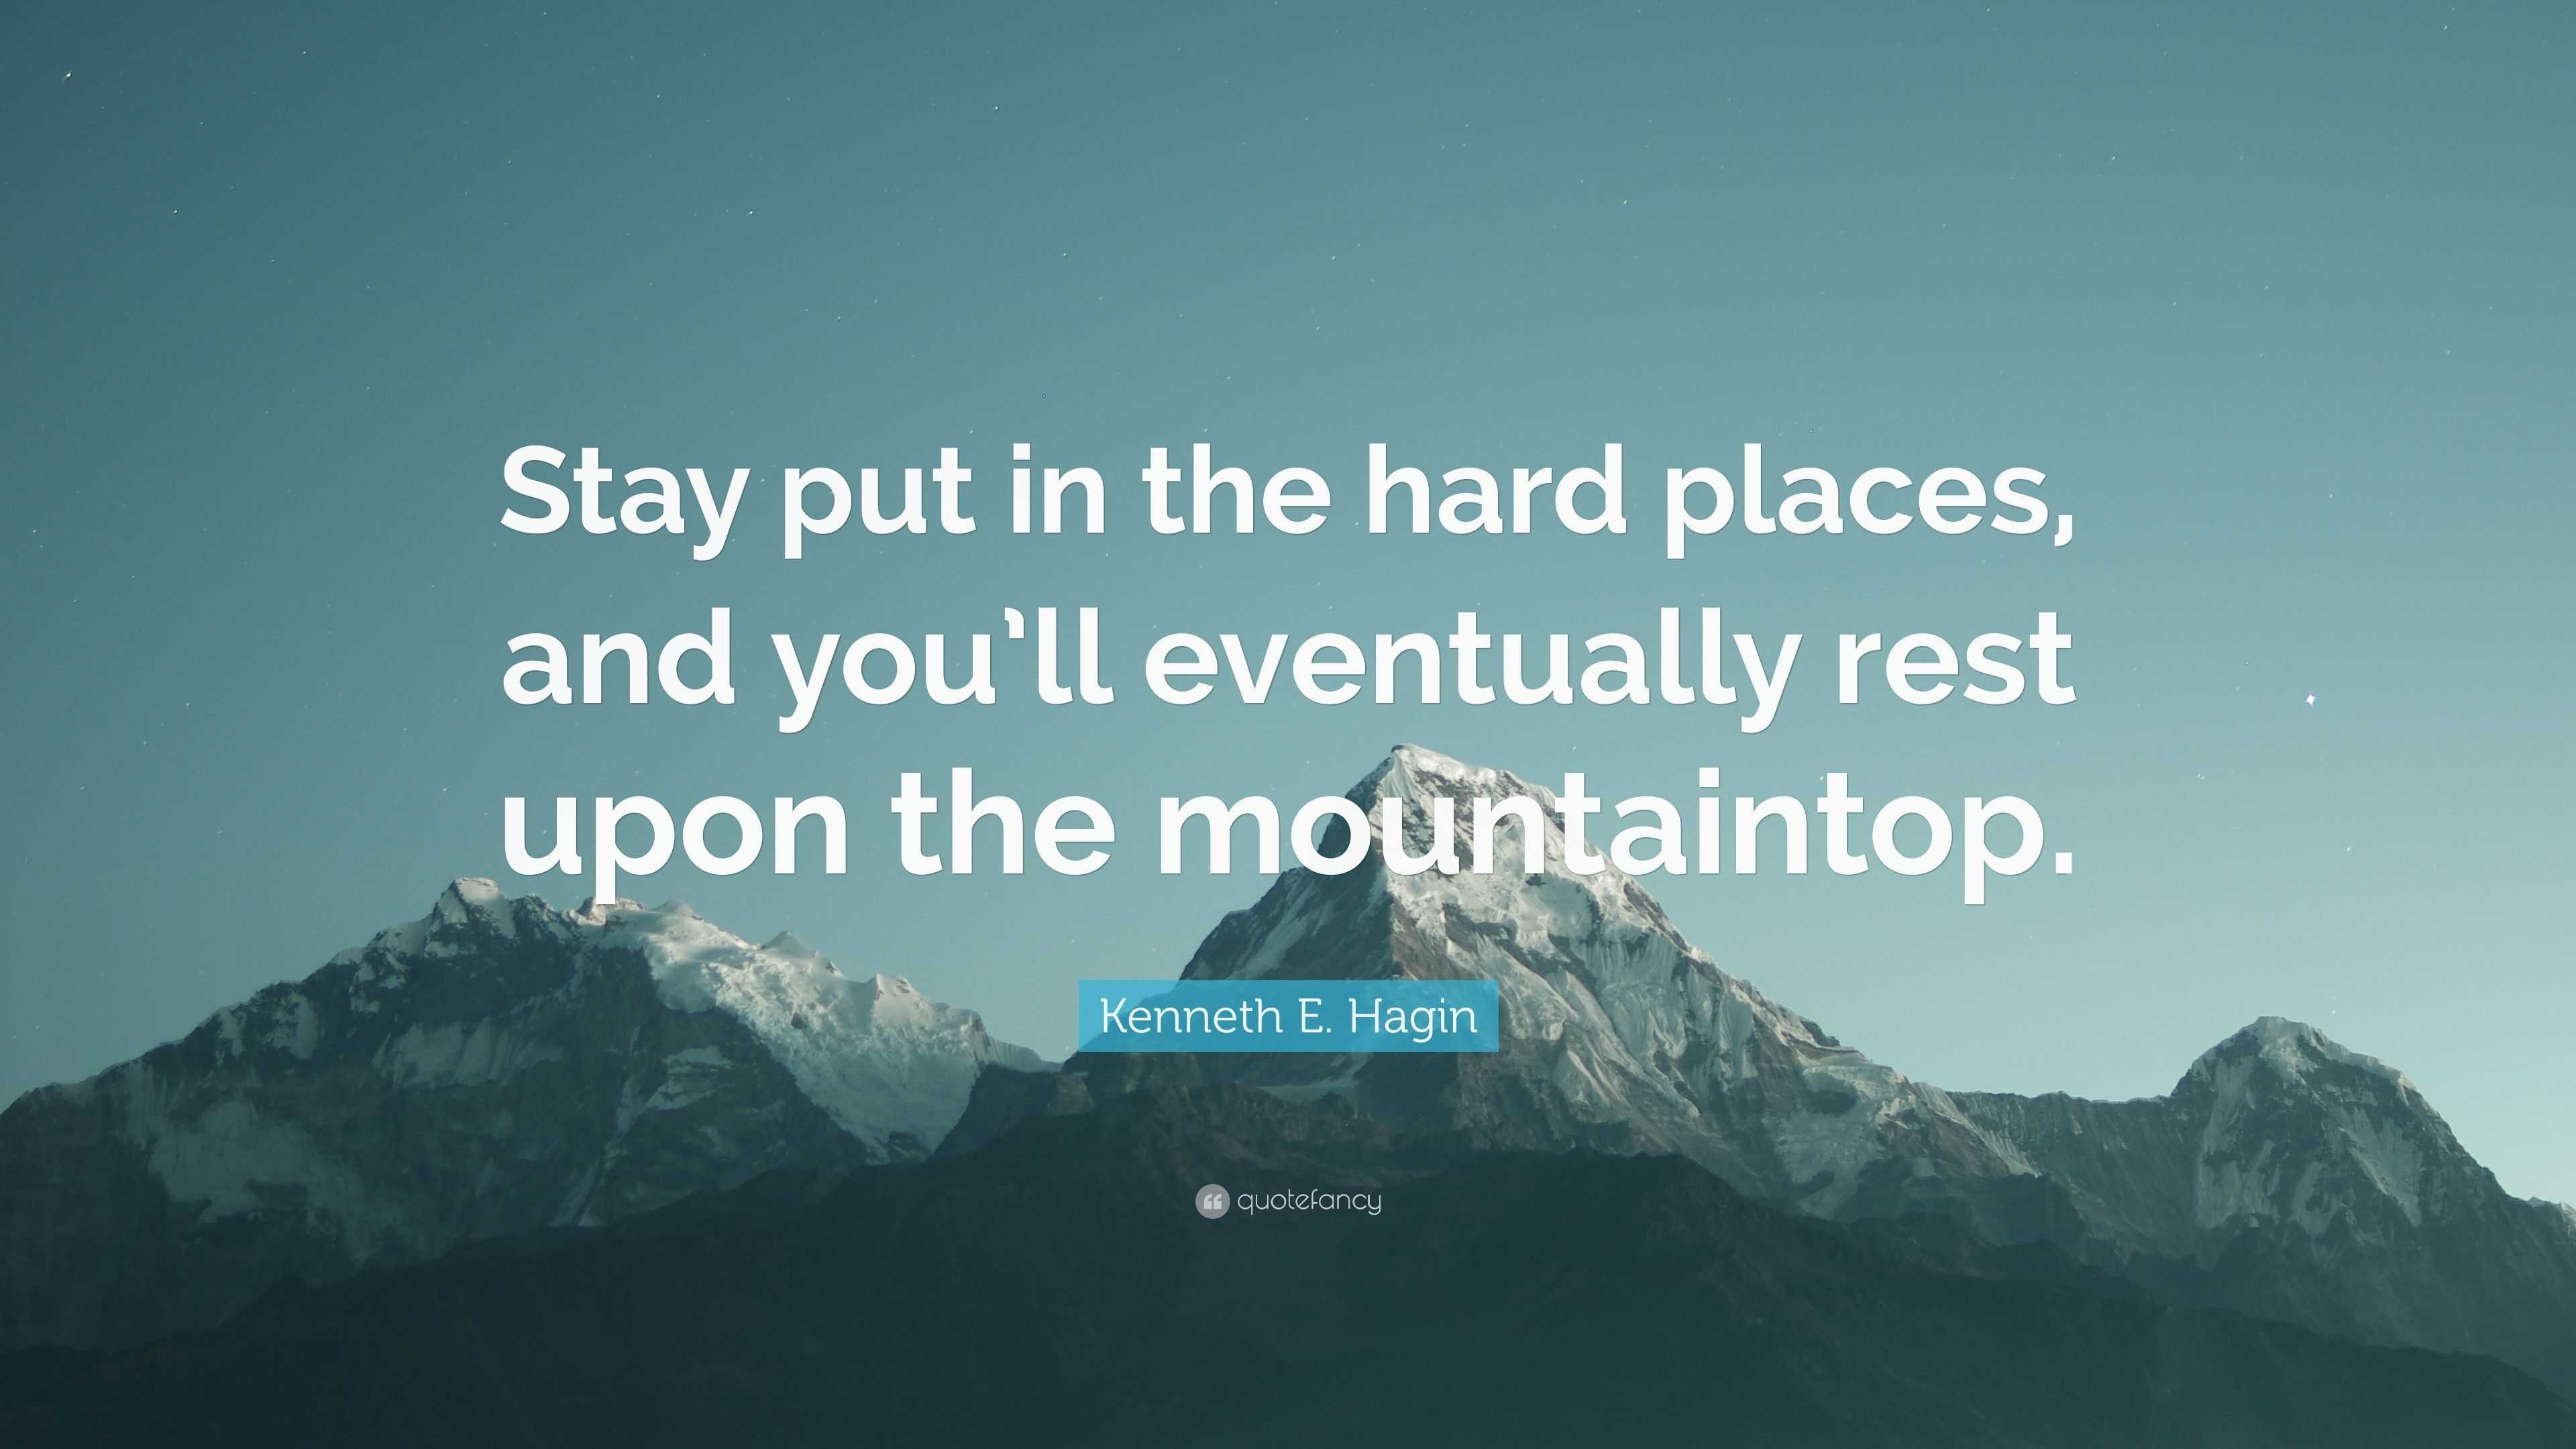 Kenneth E. Hagin Quote: “Stay put in the hard places, and you'll